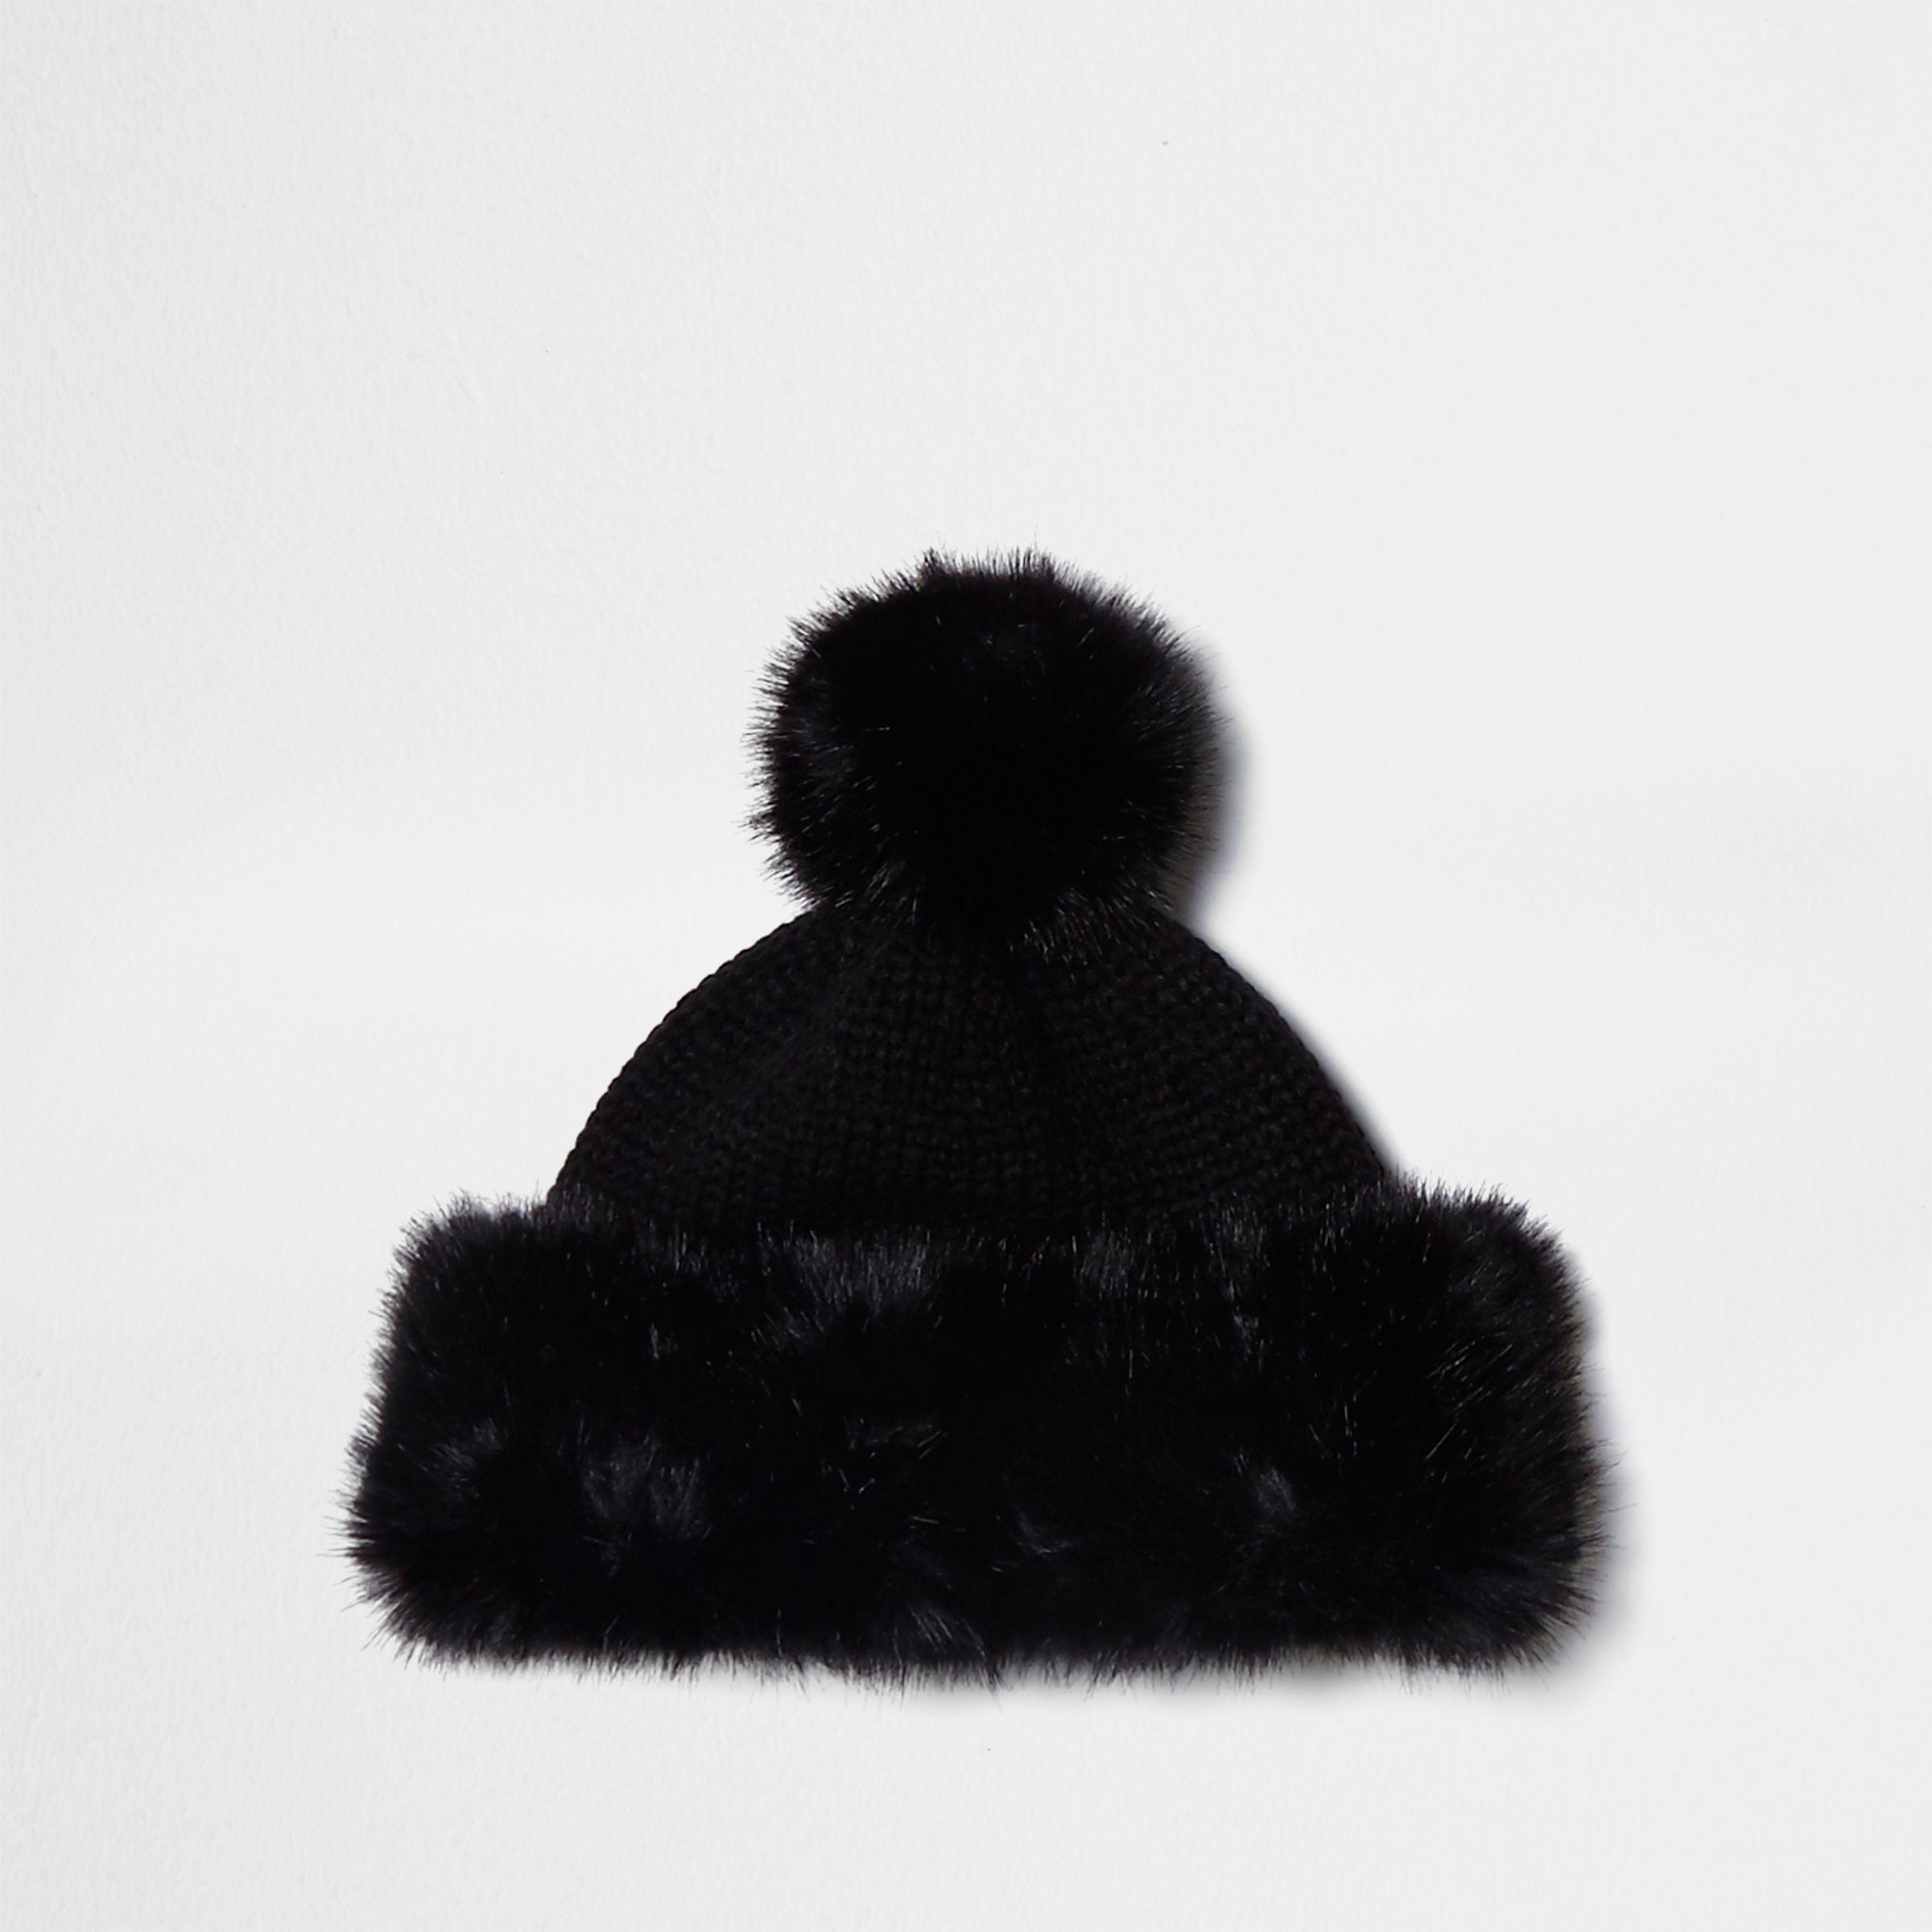 River Island Synthetic Black Knitted Faux Fur Trim Pom Pom Hat Black  Knitted Faux Fur Trim Pom Pom Hat - Lyst